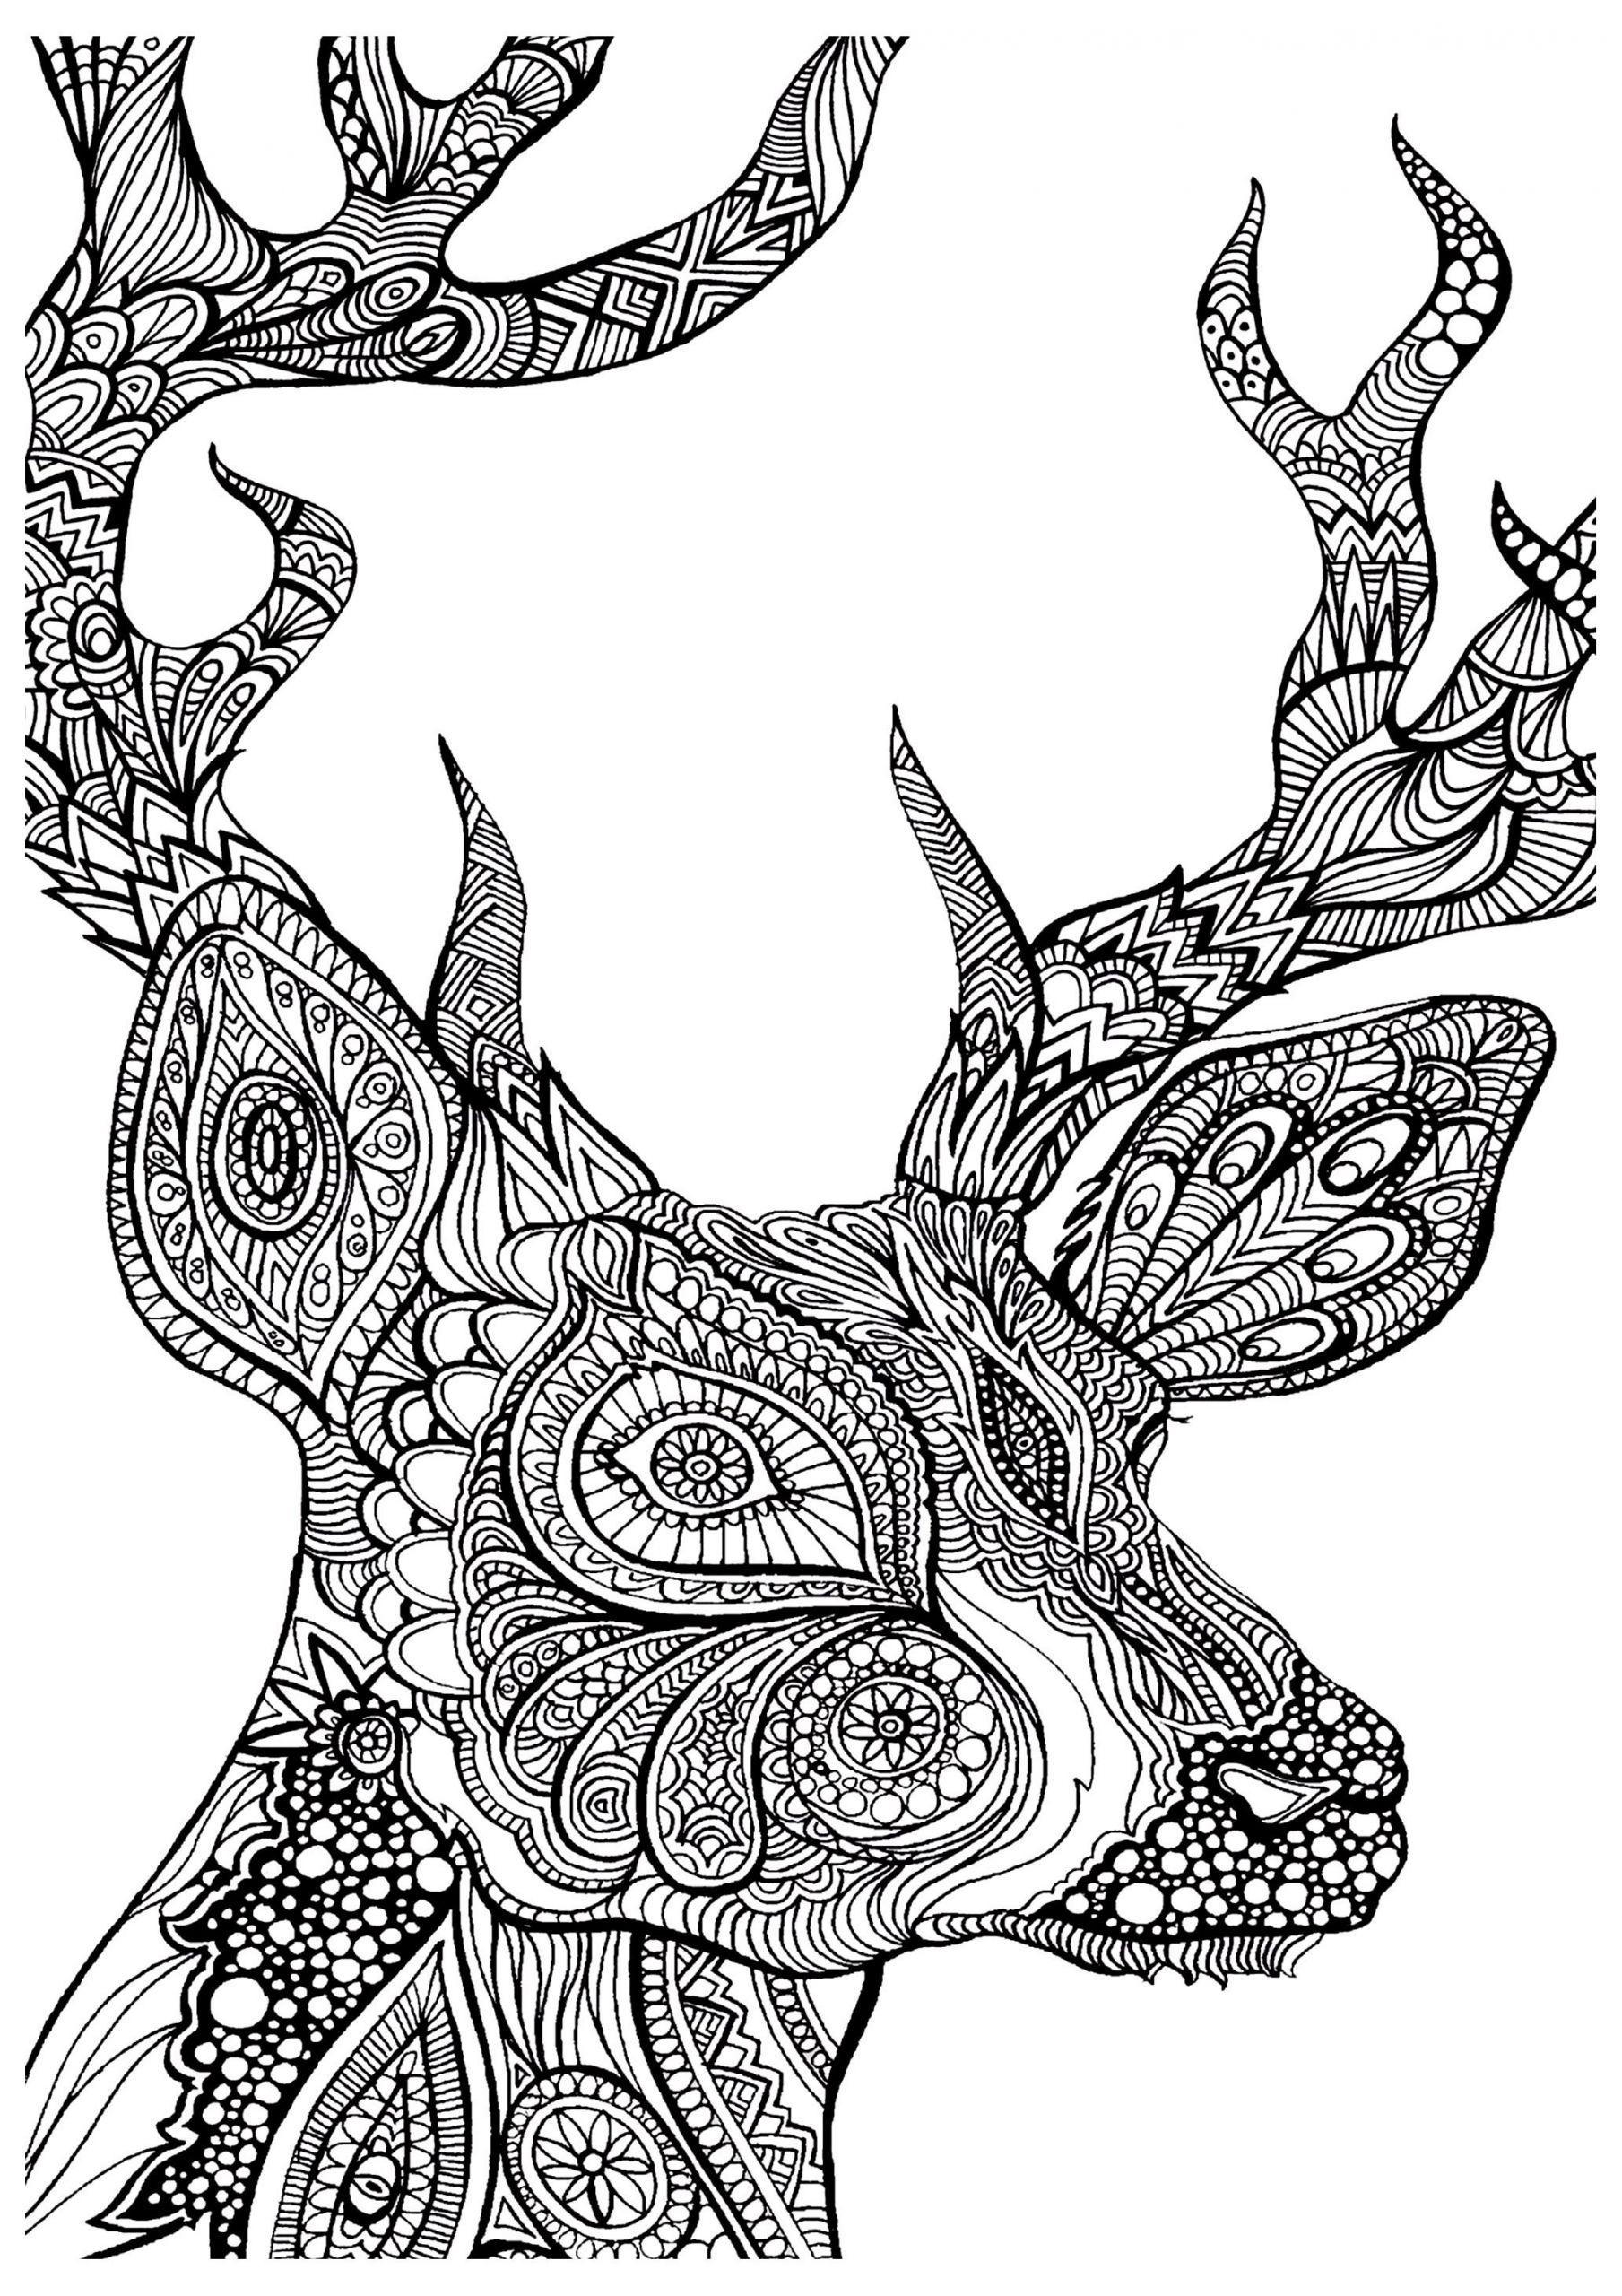 Adult Coloring Pages Free
 19 of the Best Adult Colouring Pages Free Printables for